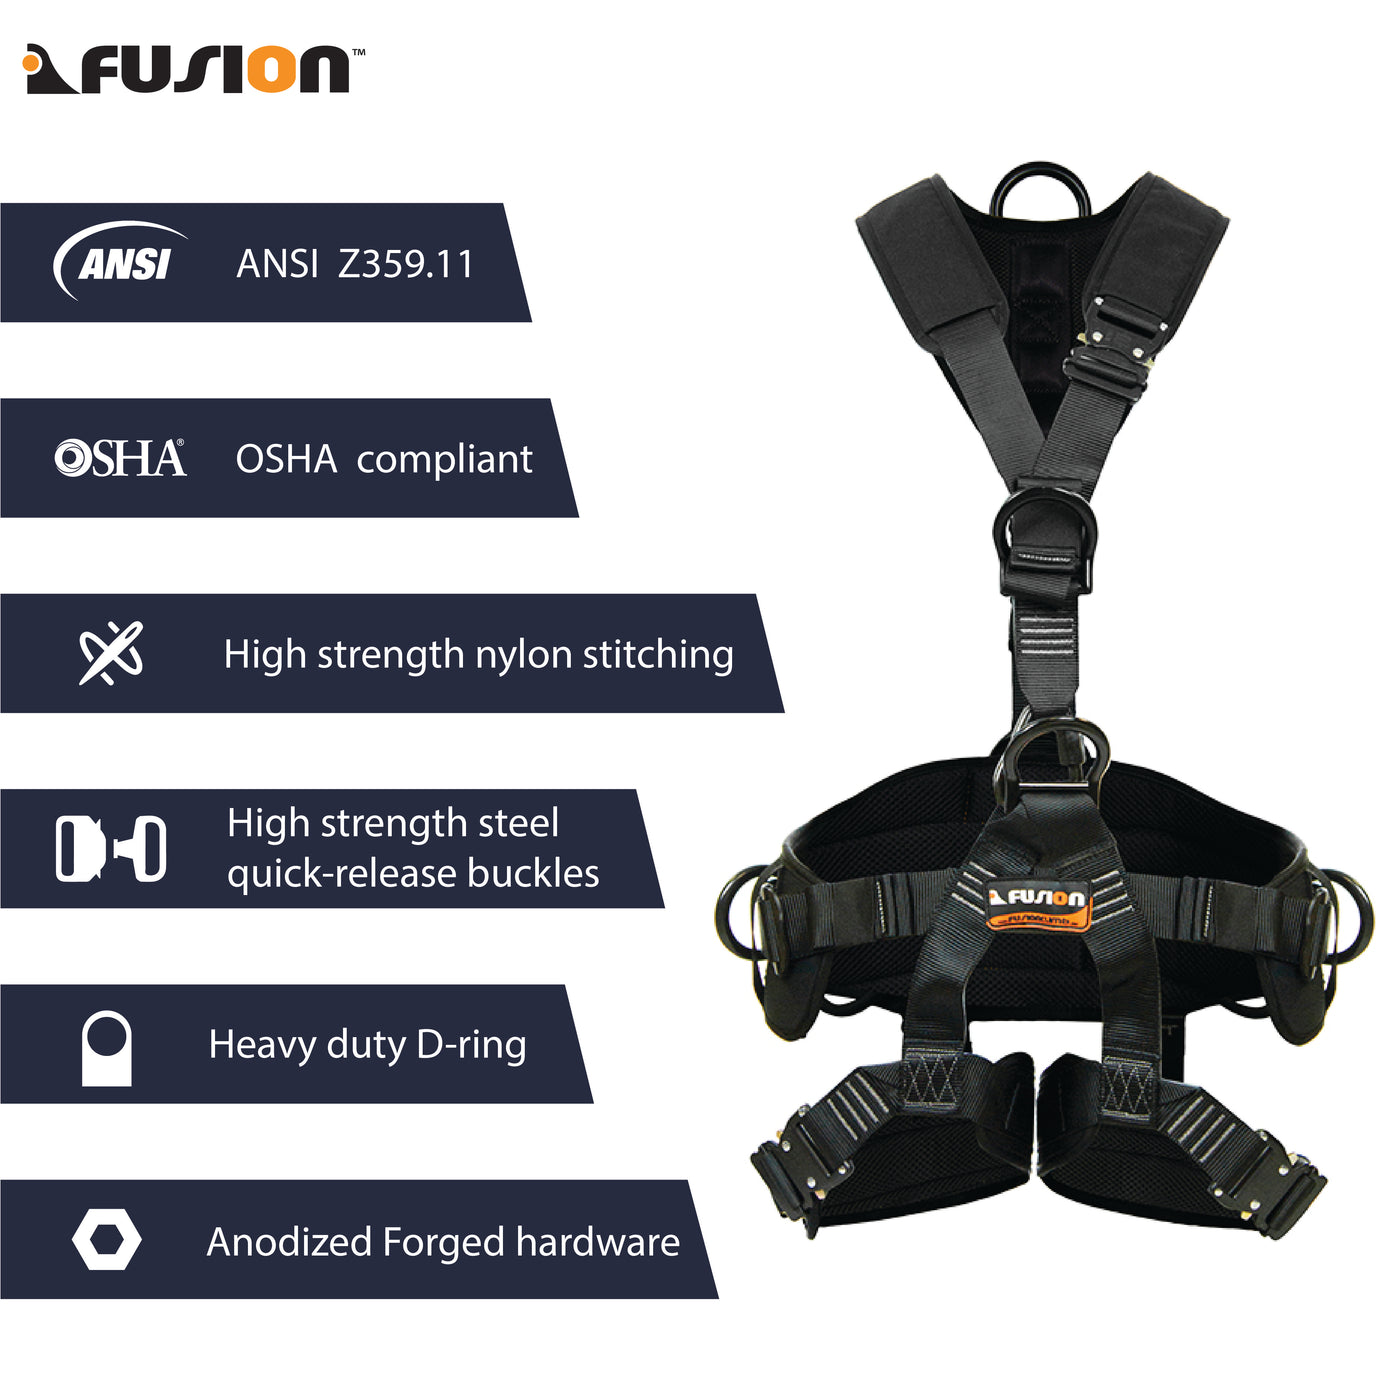 Tac Rescue Tactical Harness with Flat Foam Padding